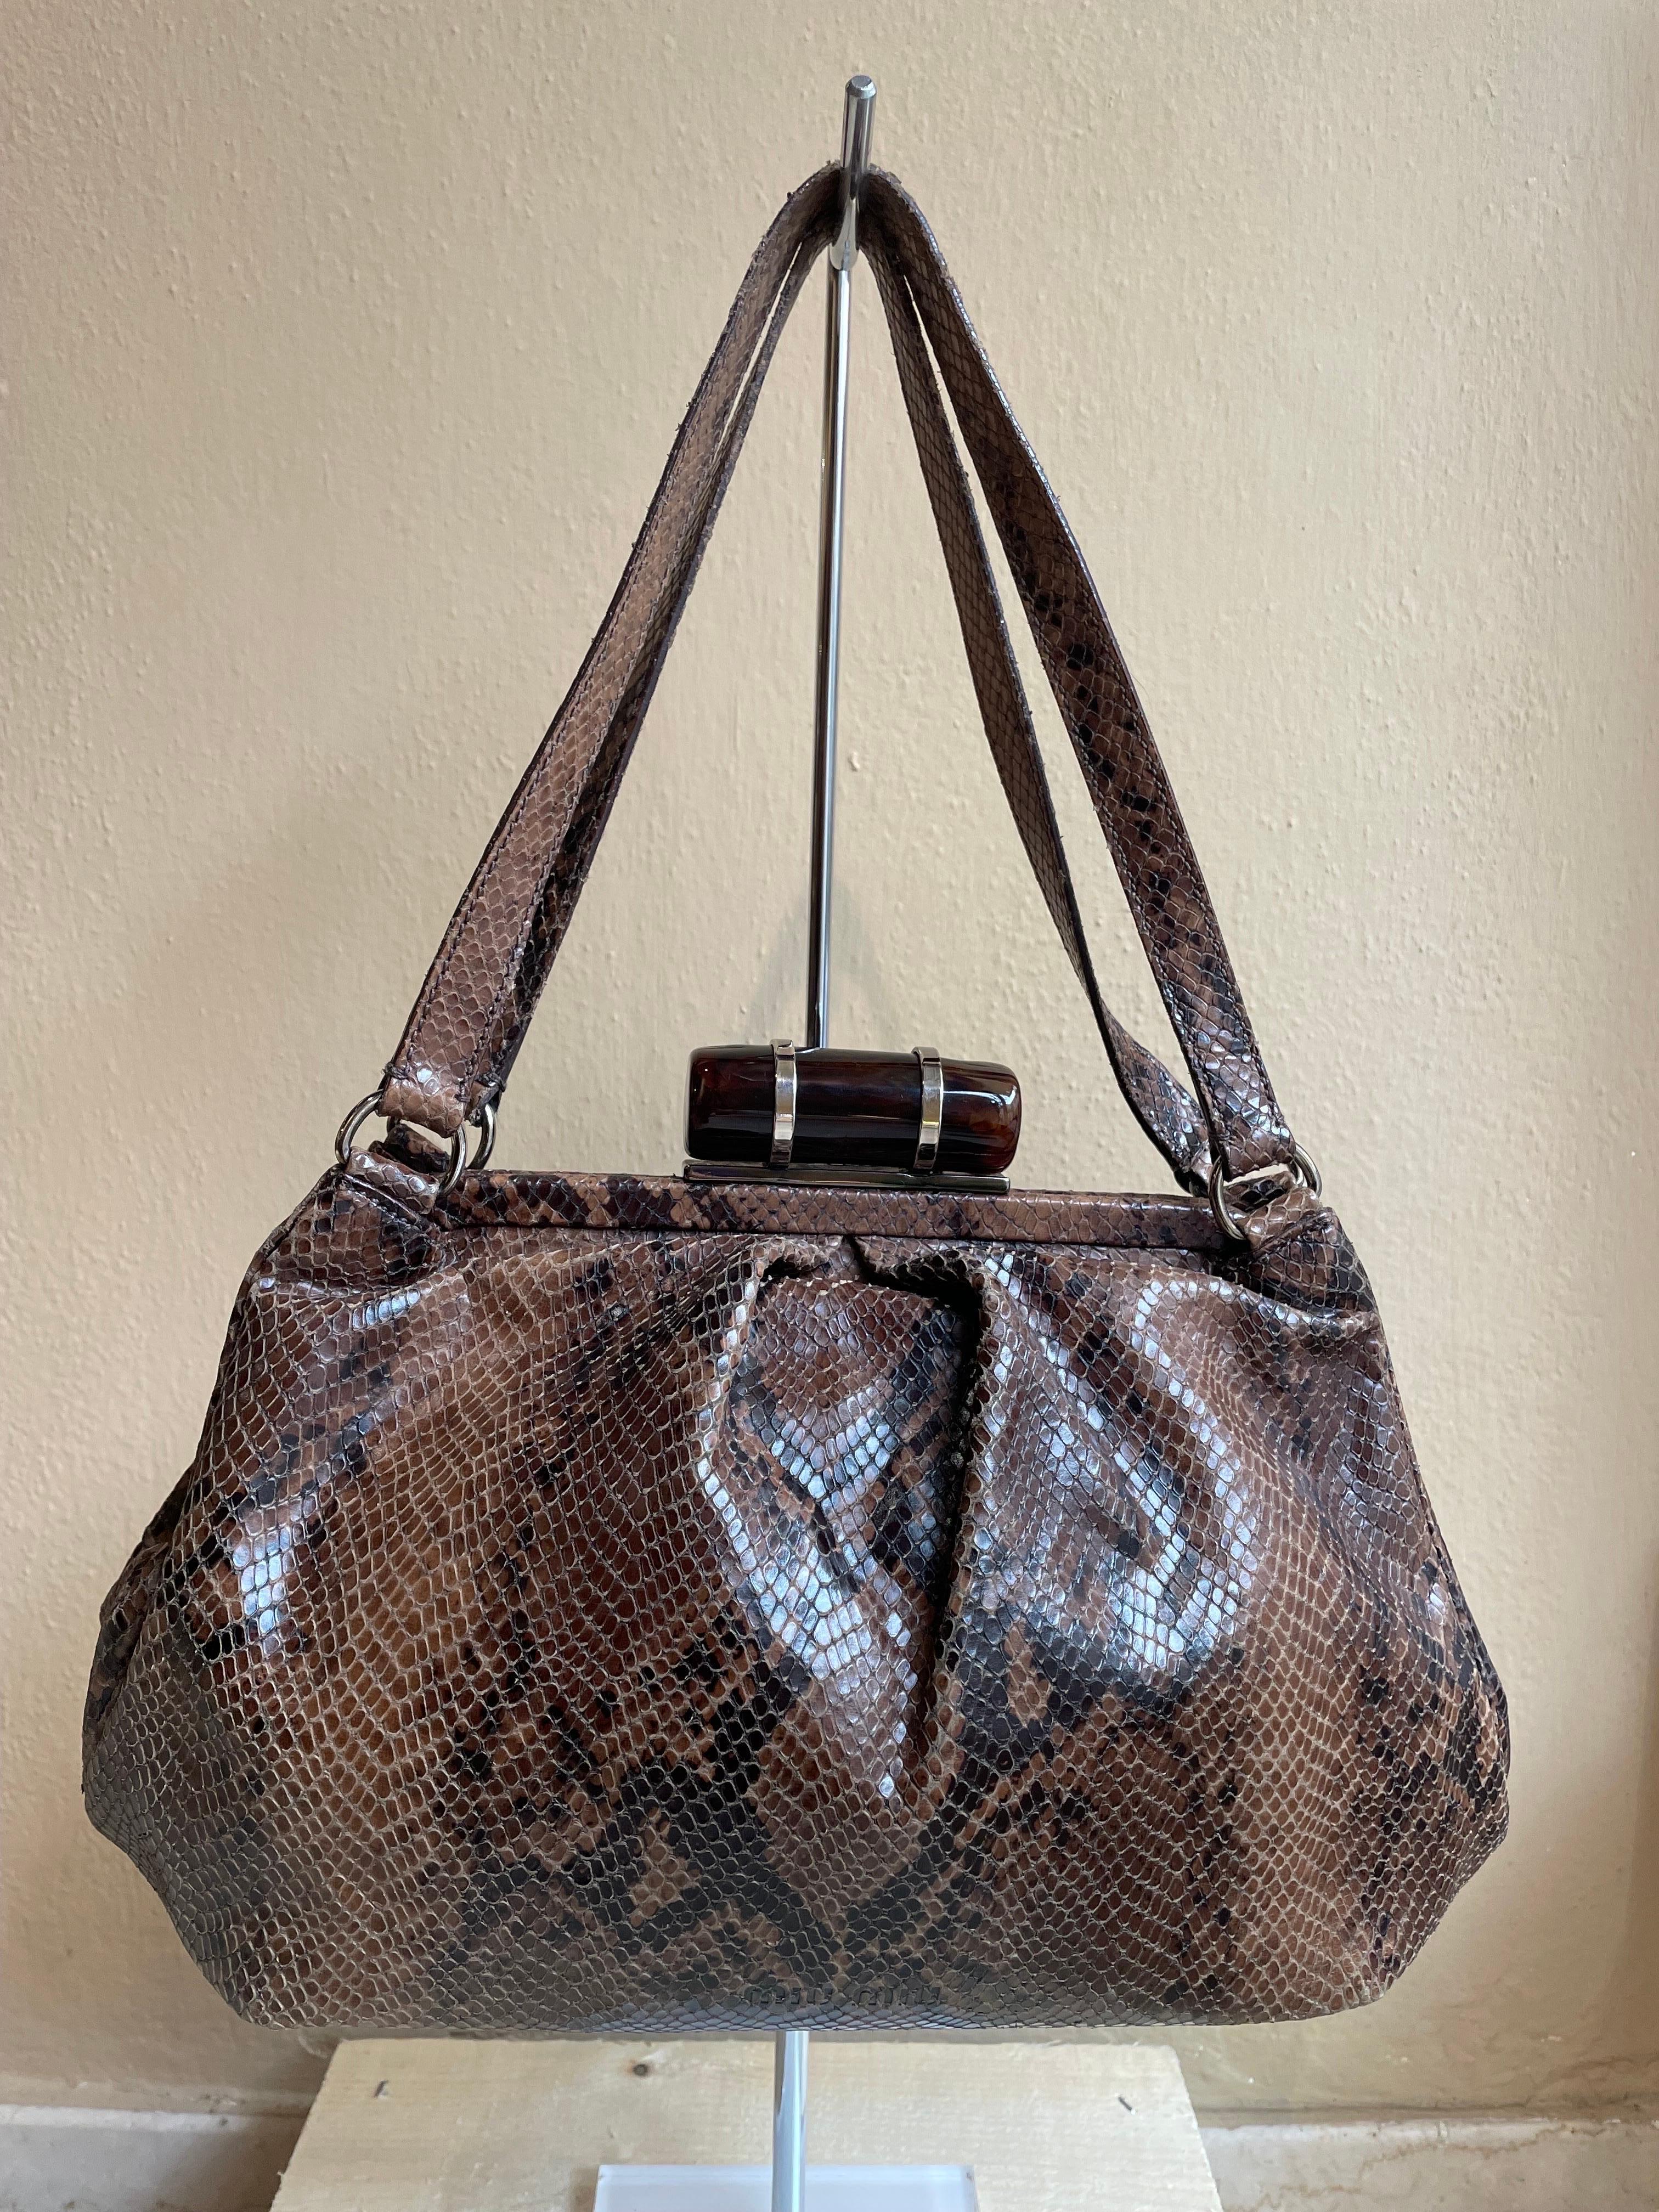 Miu Miu reptile bag in shades of brown. Interlocking wood-effect resin closure. Silver hardware. It has some signs of use as you can see from the photos but nothing serious to report. Interior consists of a large pocket plus a side pocket closed